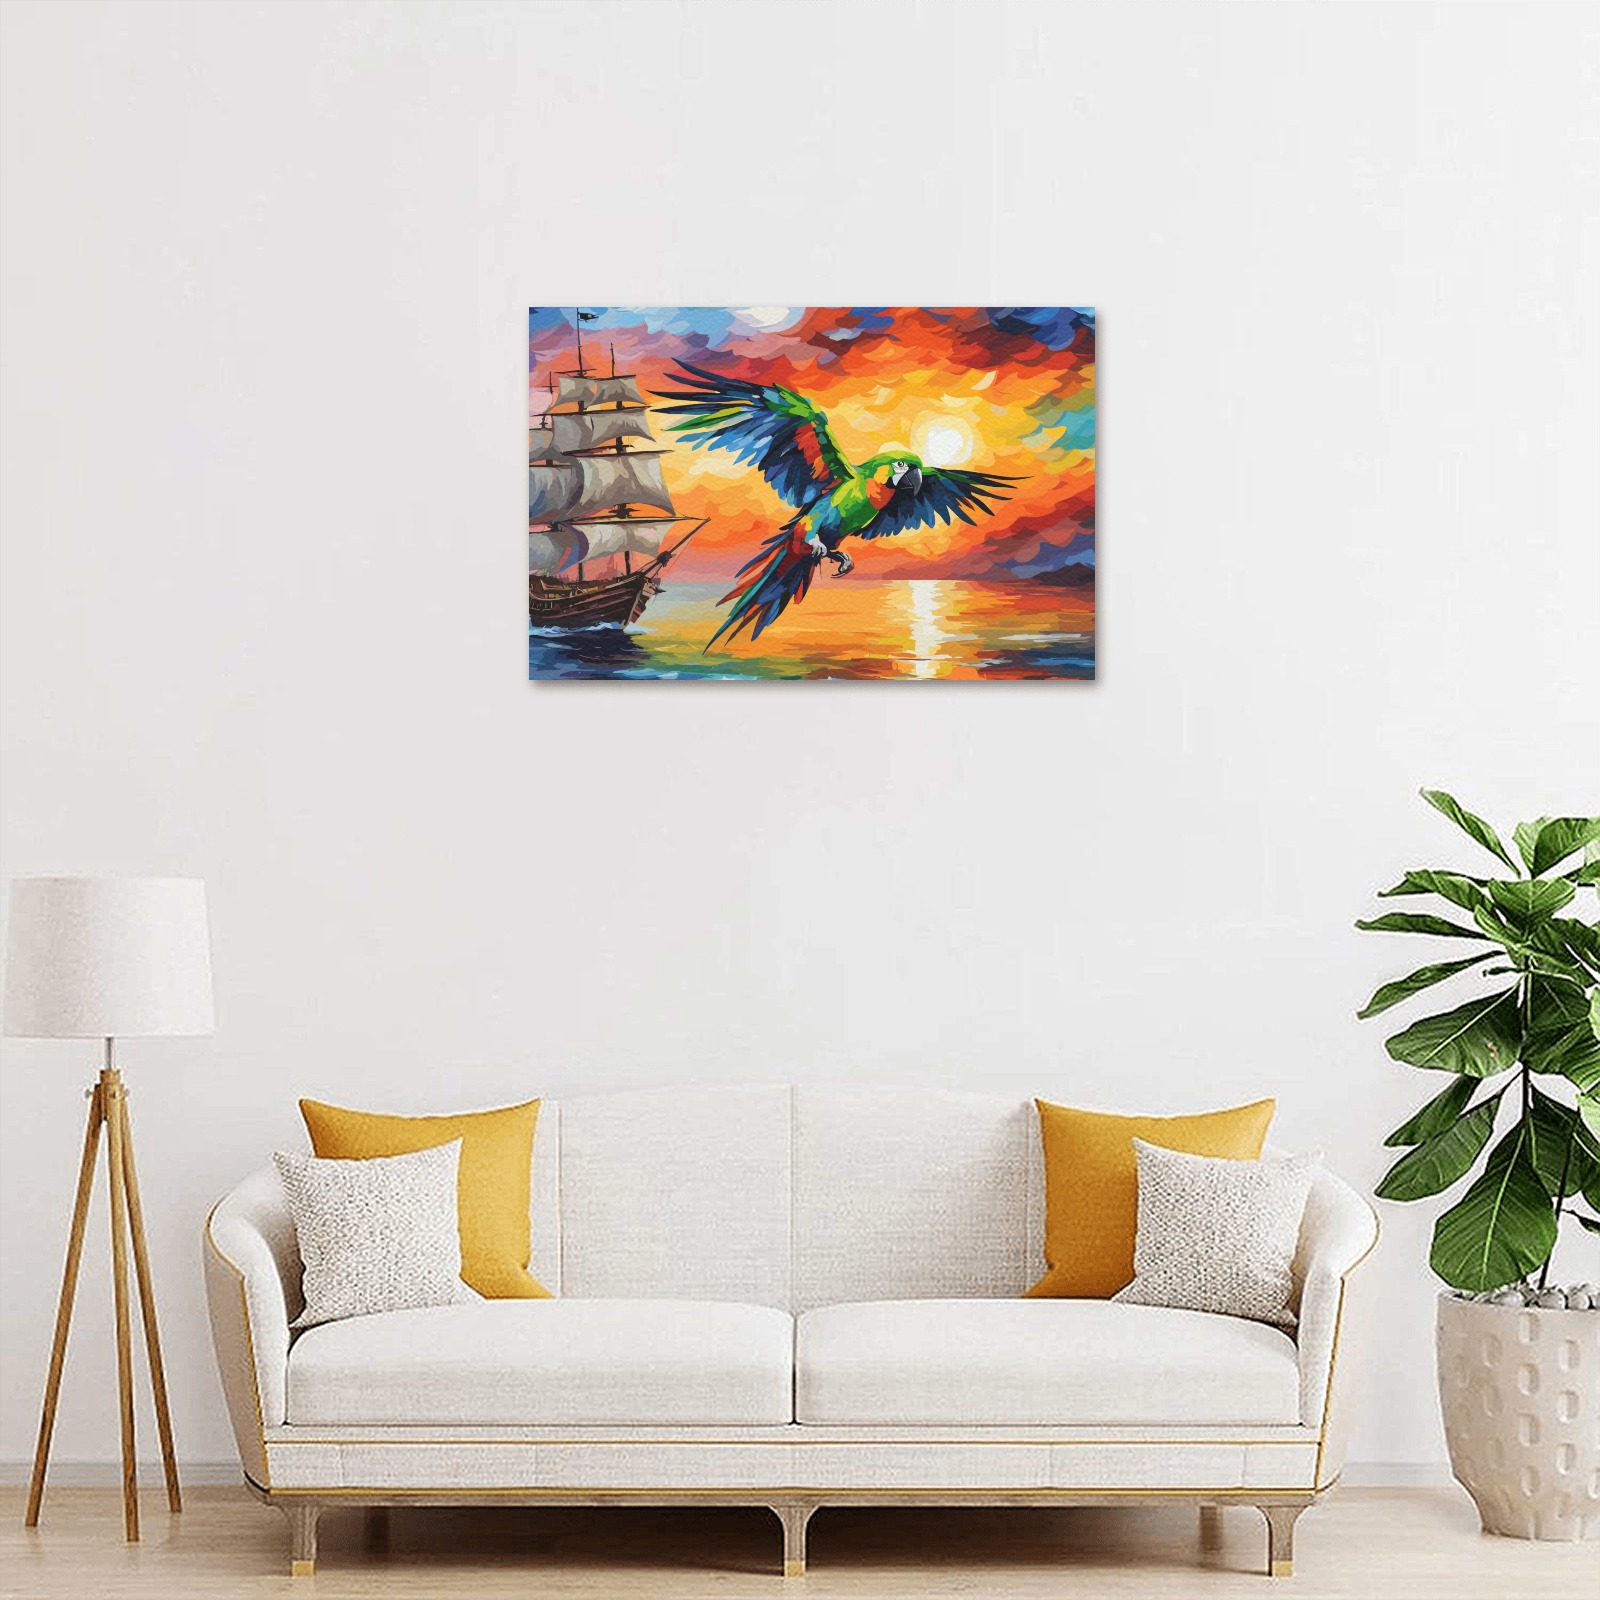 A parrot and a pirate ship. Dramatic ocean sunset. Upgraded Canvas Print 18"x12"